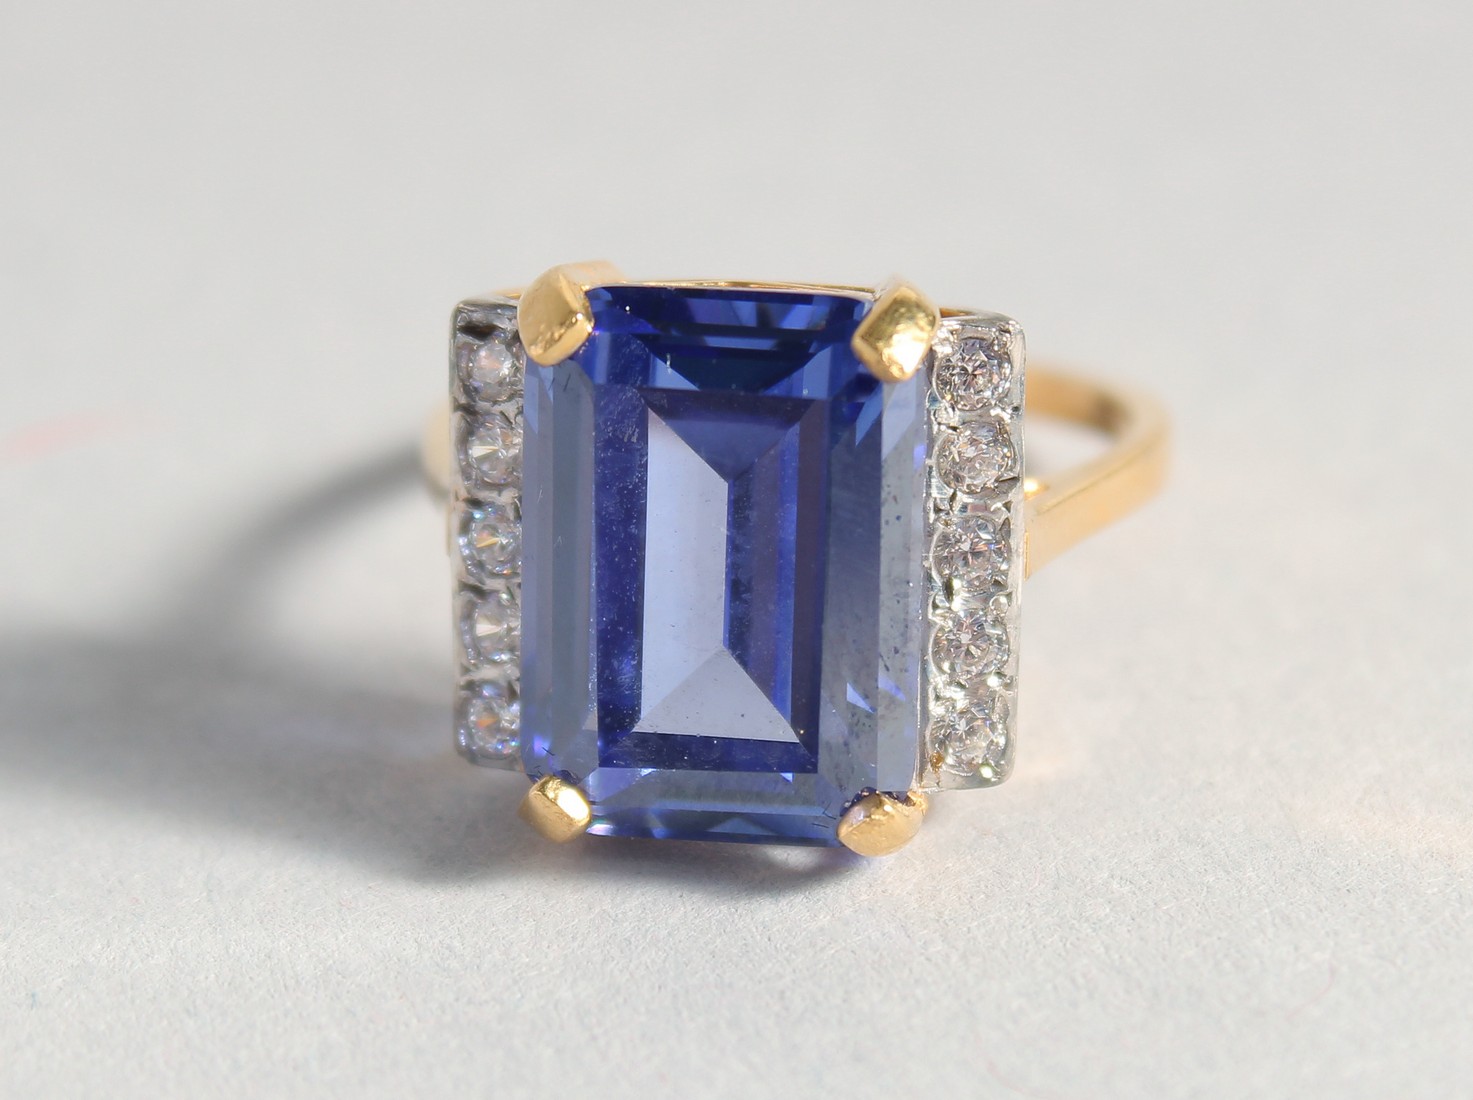 A SILVER GOLD-PLATED FAUX TANZANITE DECO STYLE RING.